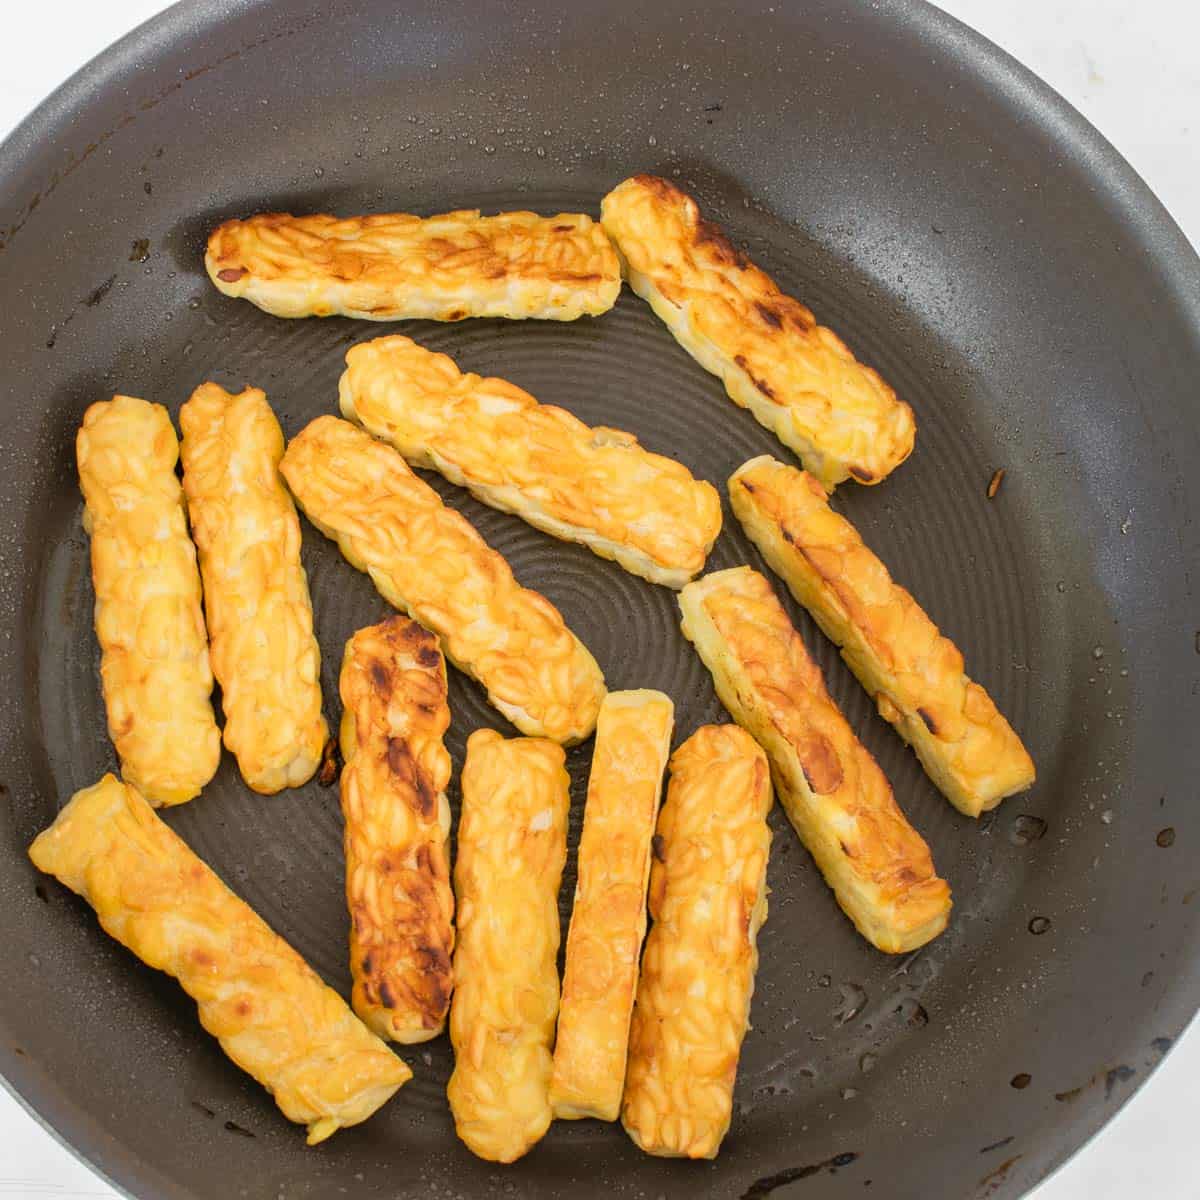 sauteed tempeh in a nonstick pan.